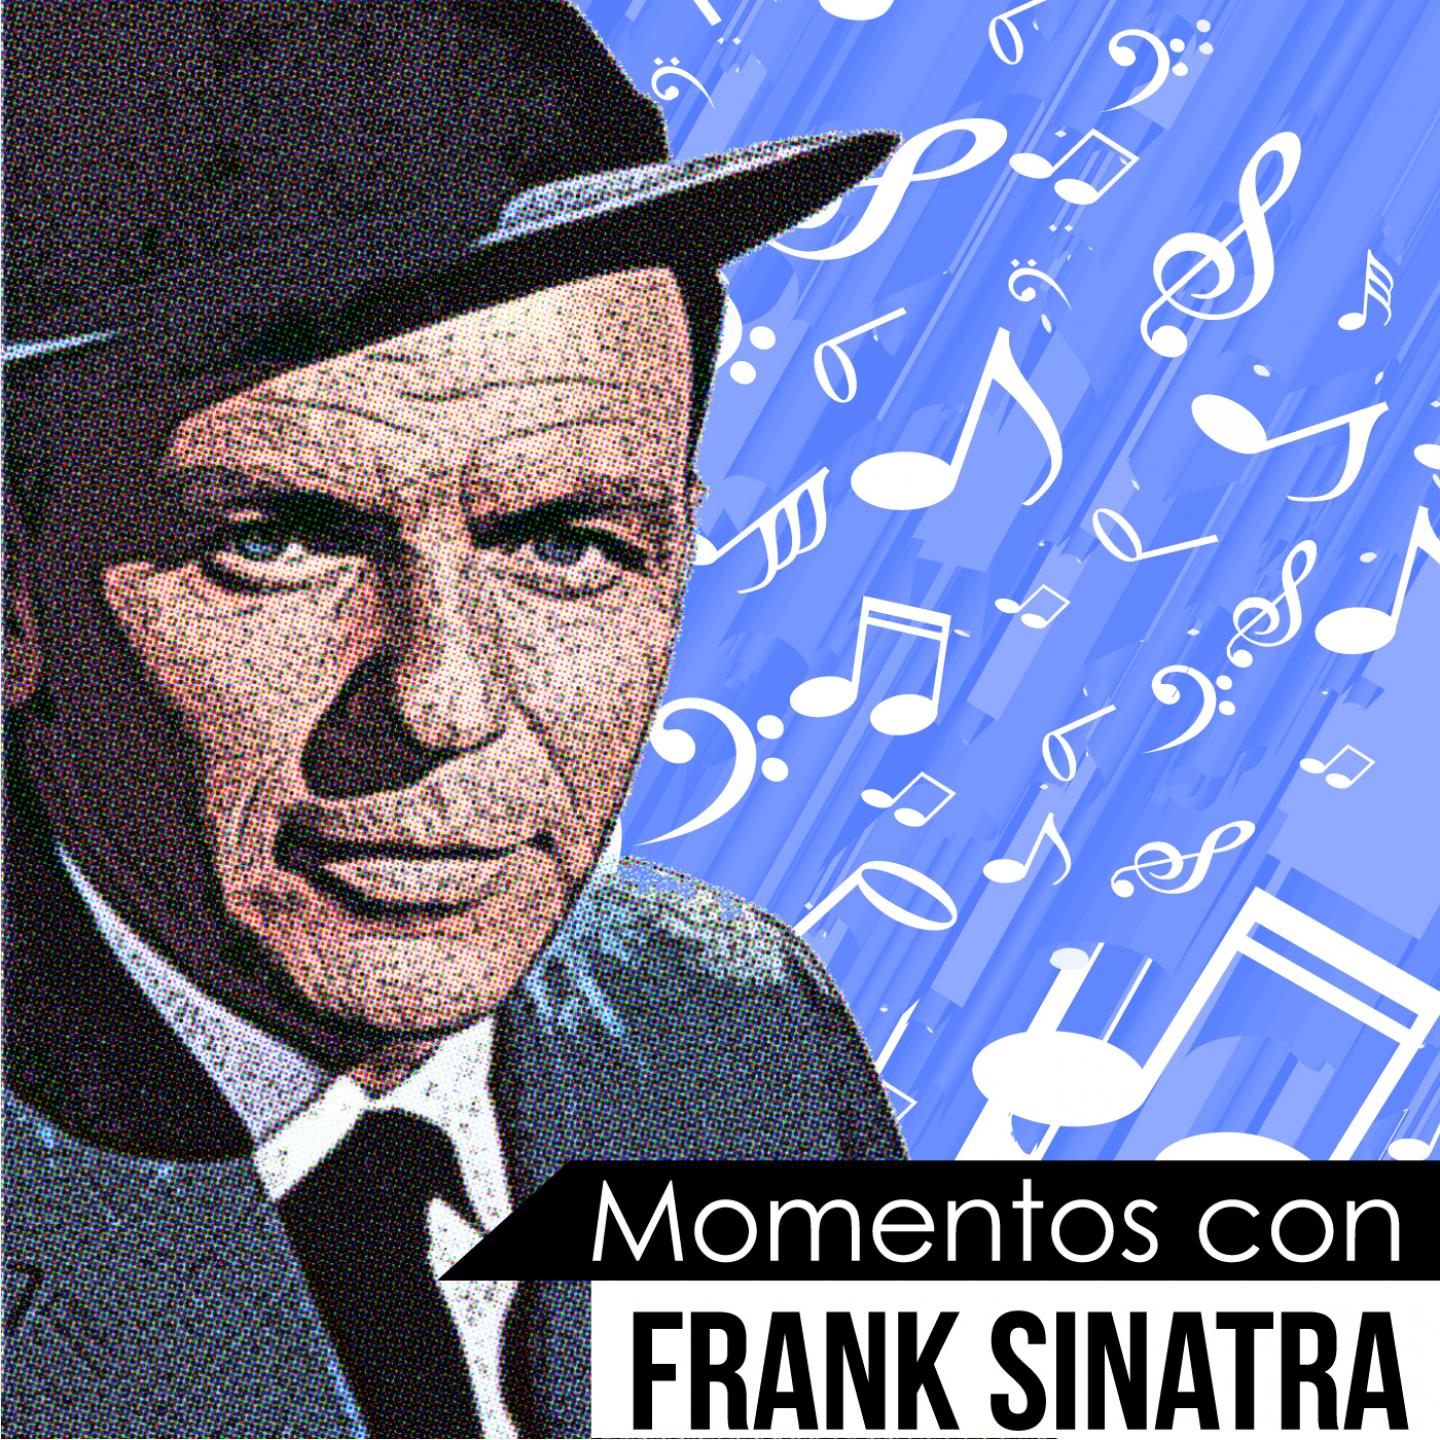 All or Nothing at All (Momentos Con Frank Sinatra)